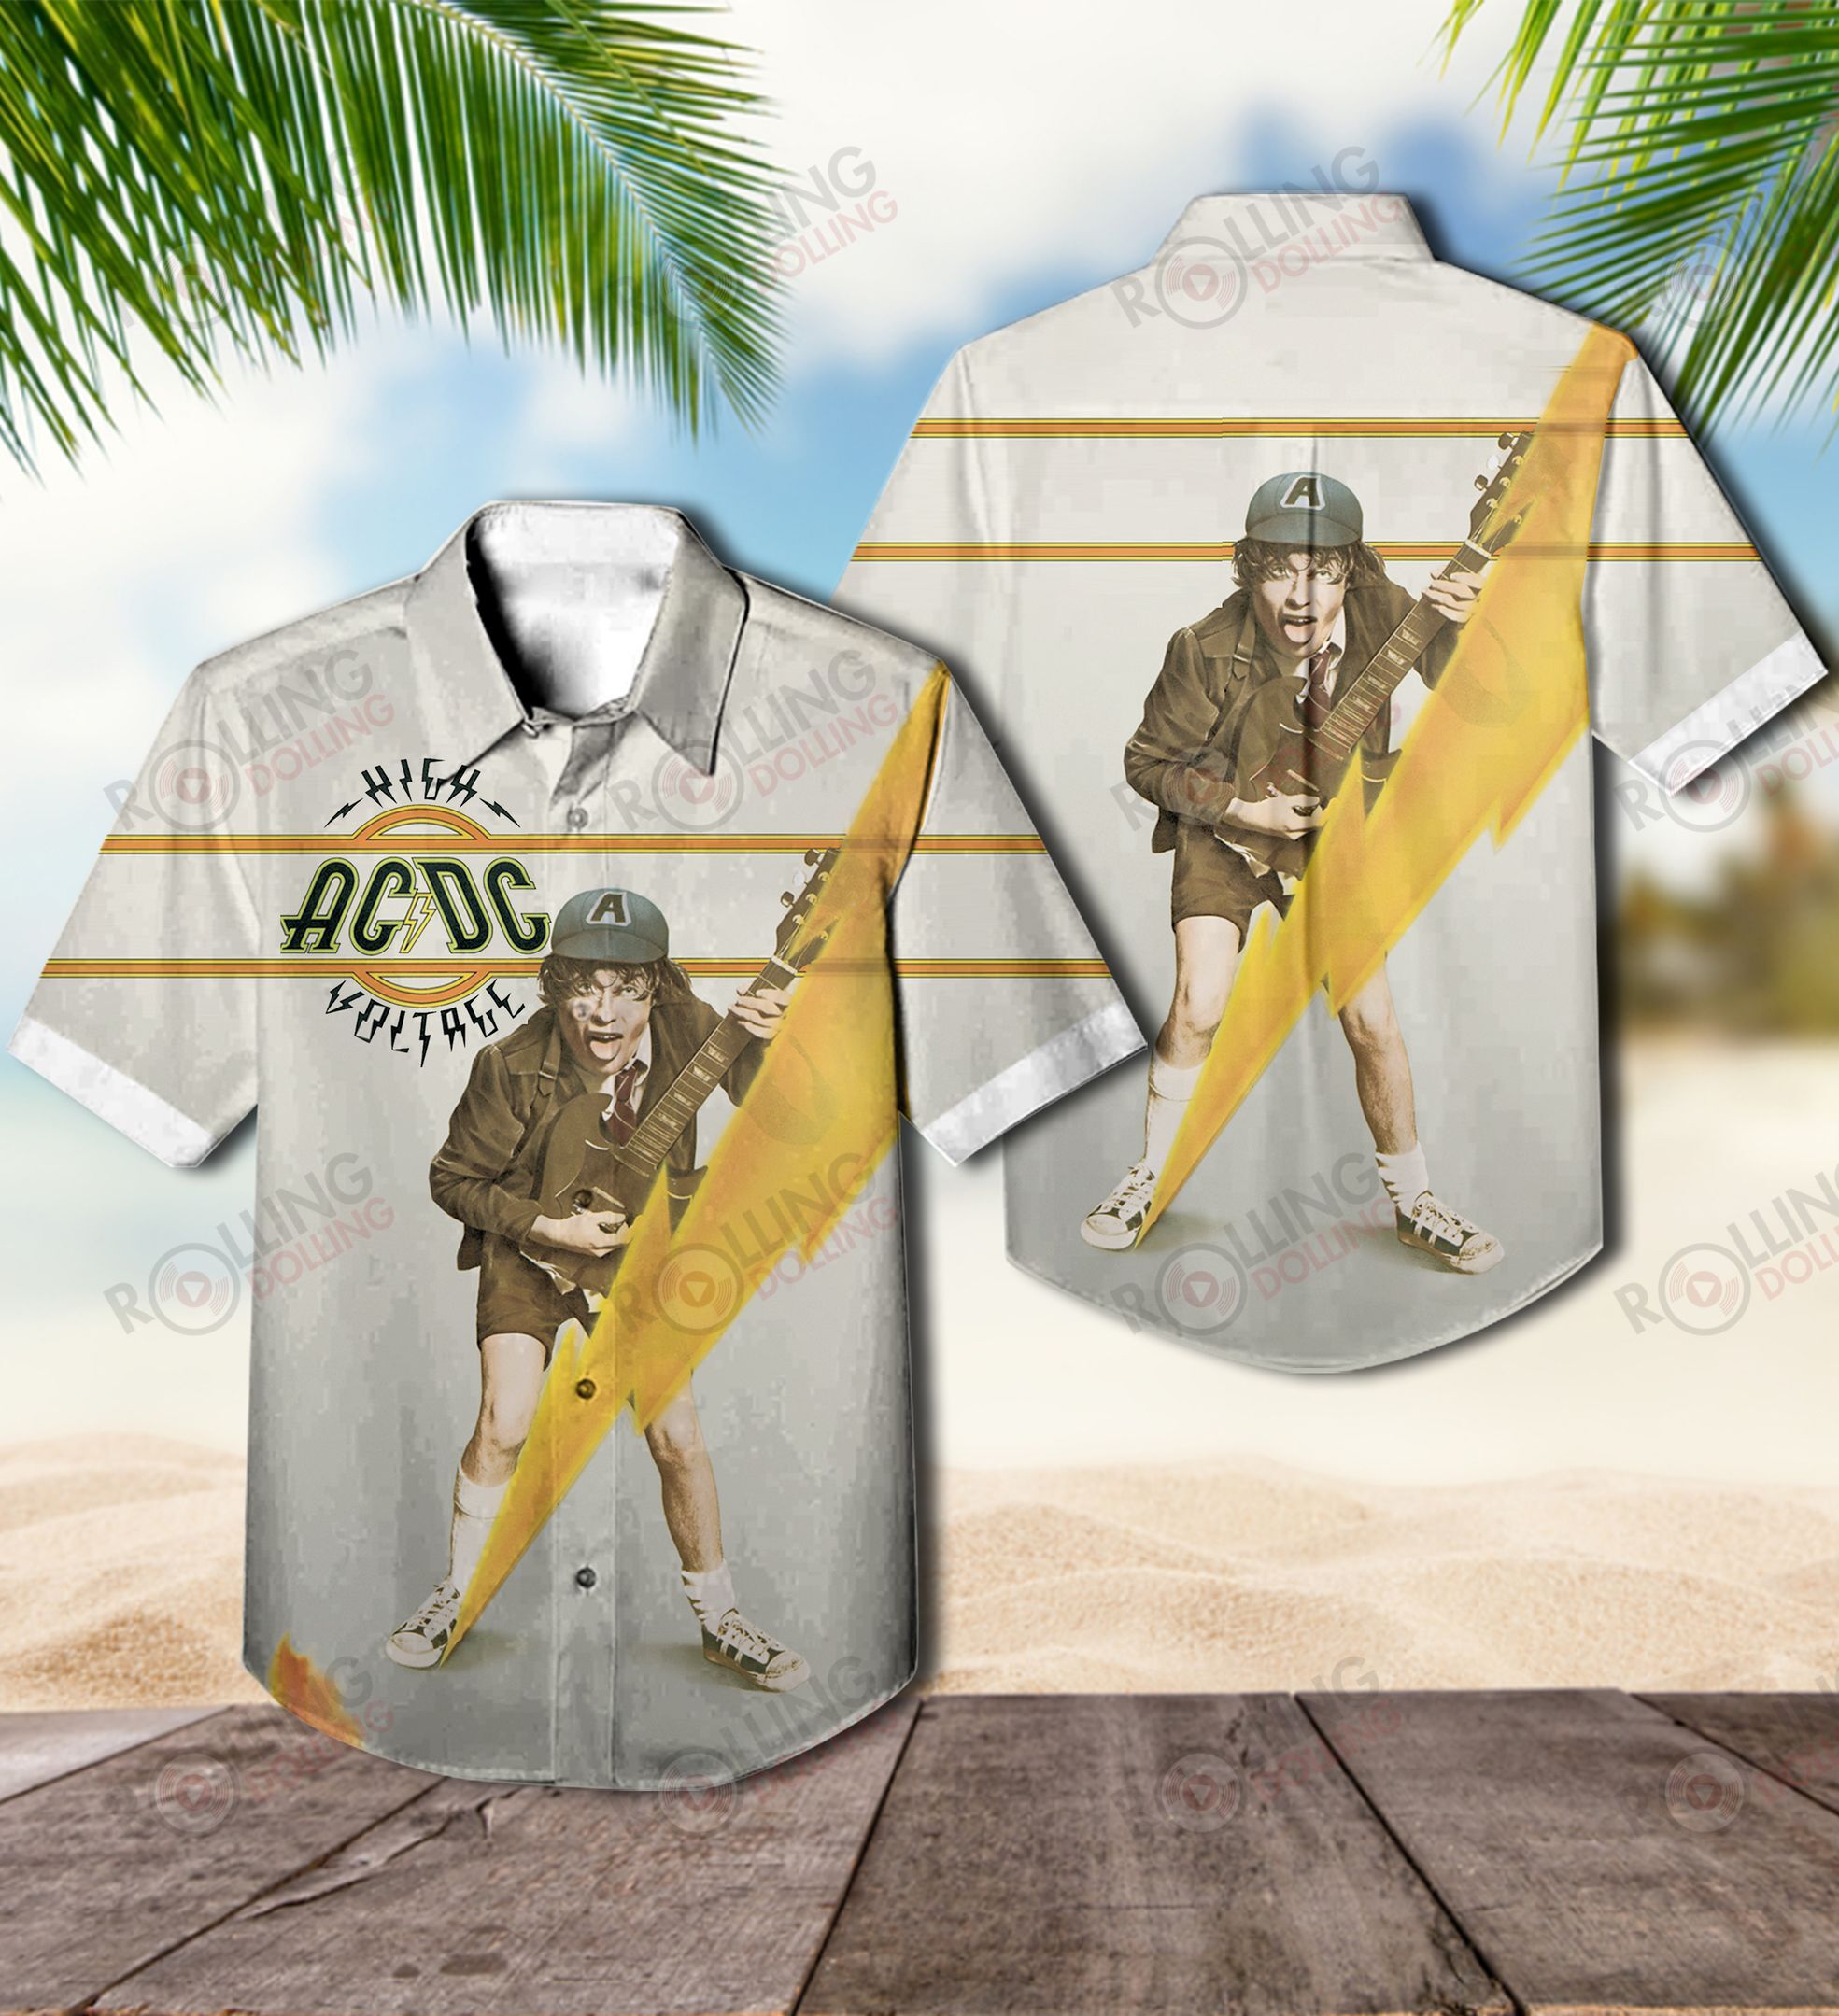 You'll have the perfect vacation outfit with this Hawaiian shirt 265